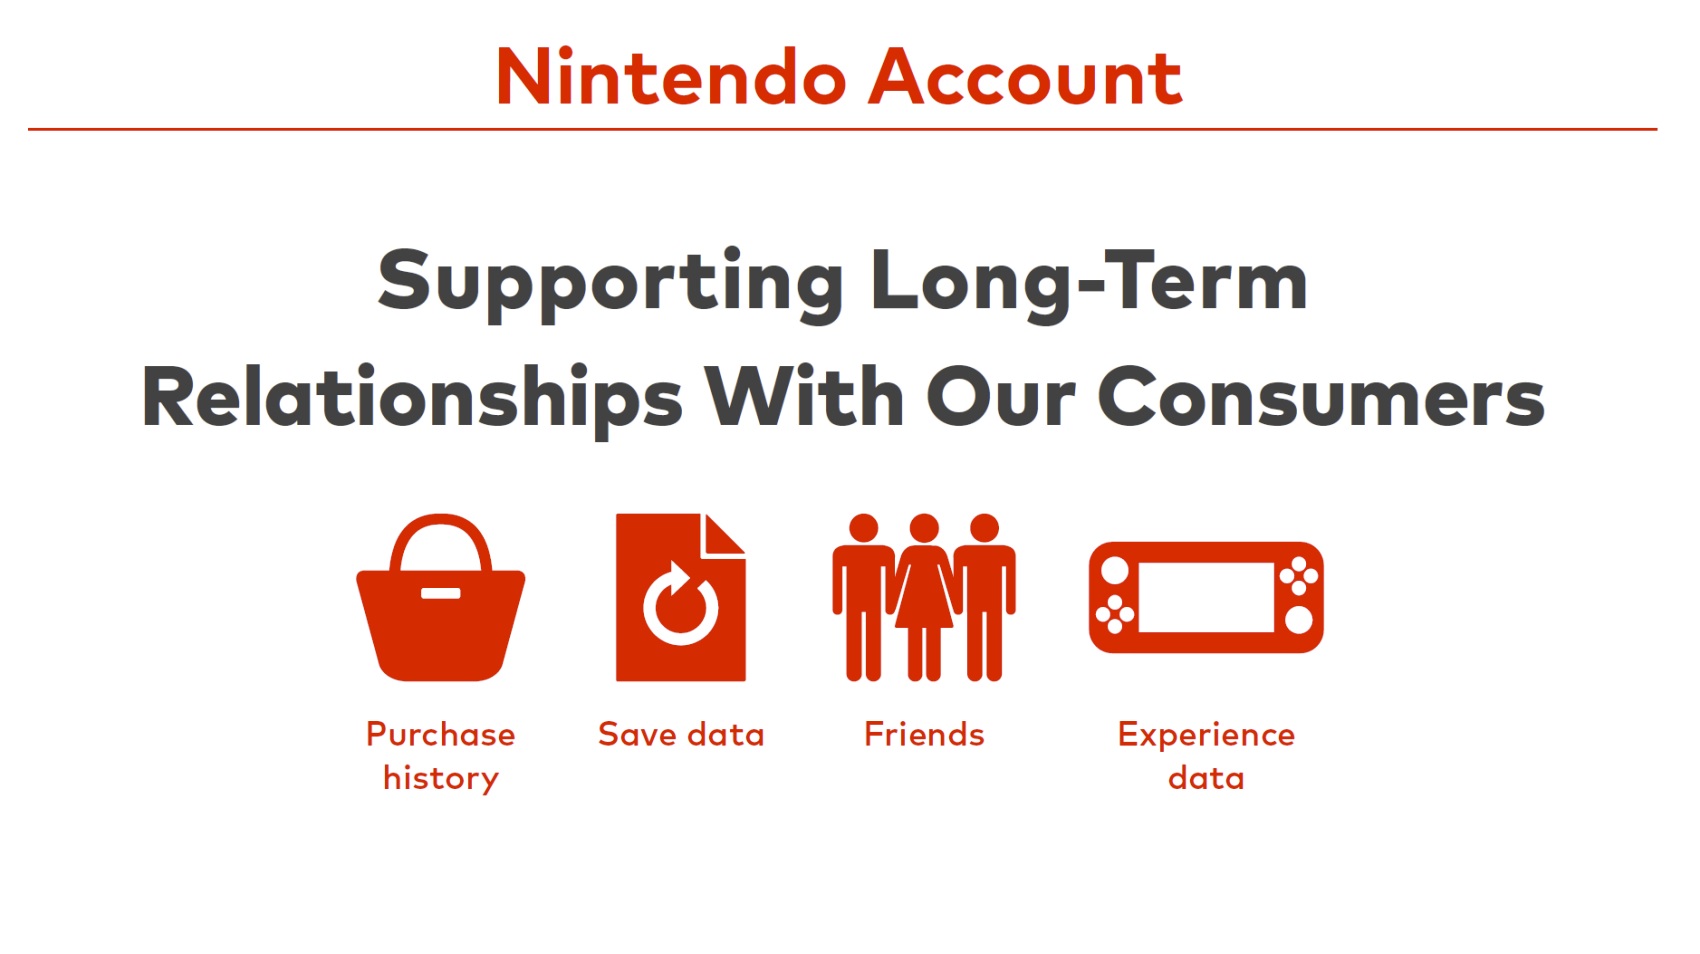 Nintendo Accounts at over 330 million, will be foundation for Nintendo's  lasting relationship with consumers